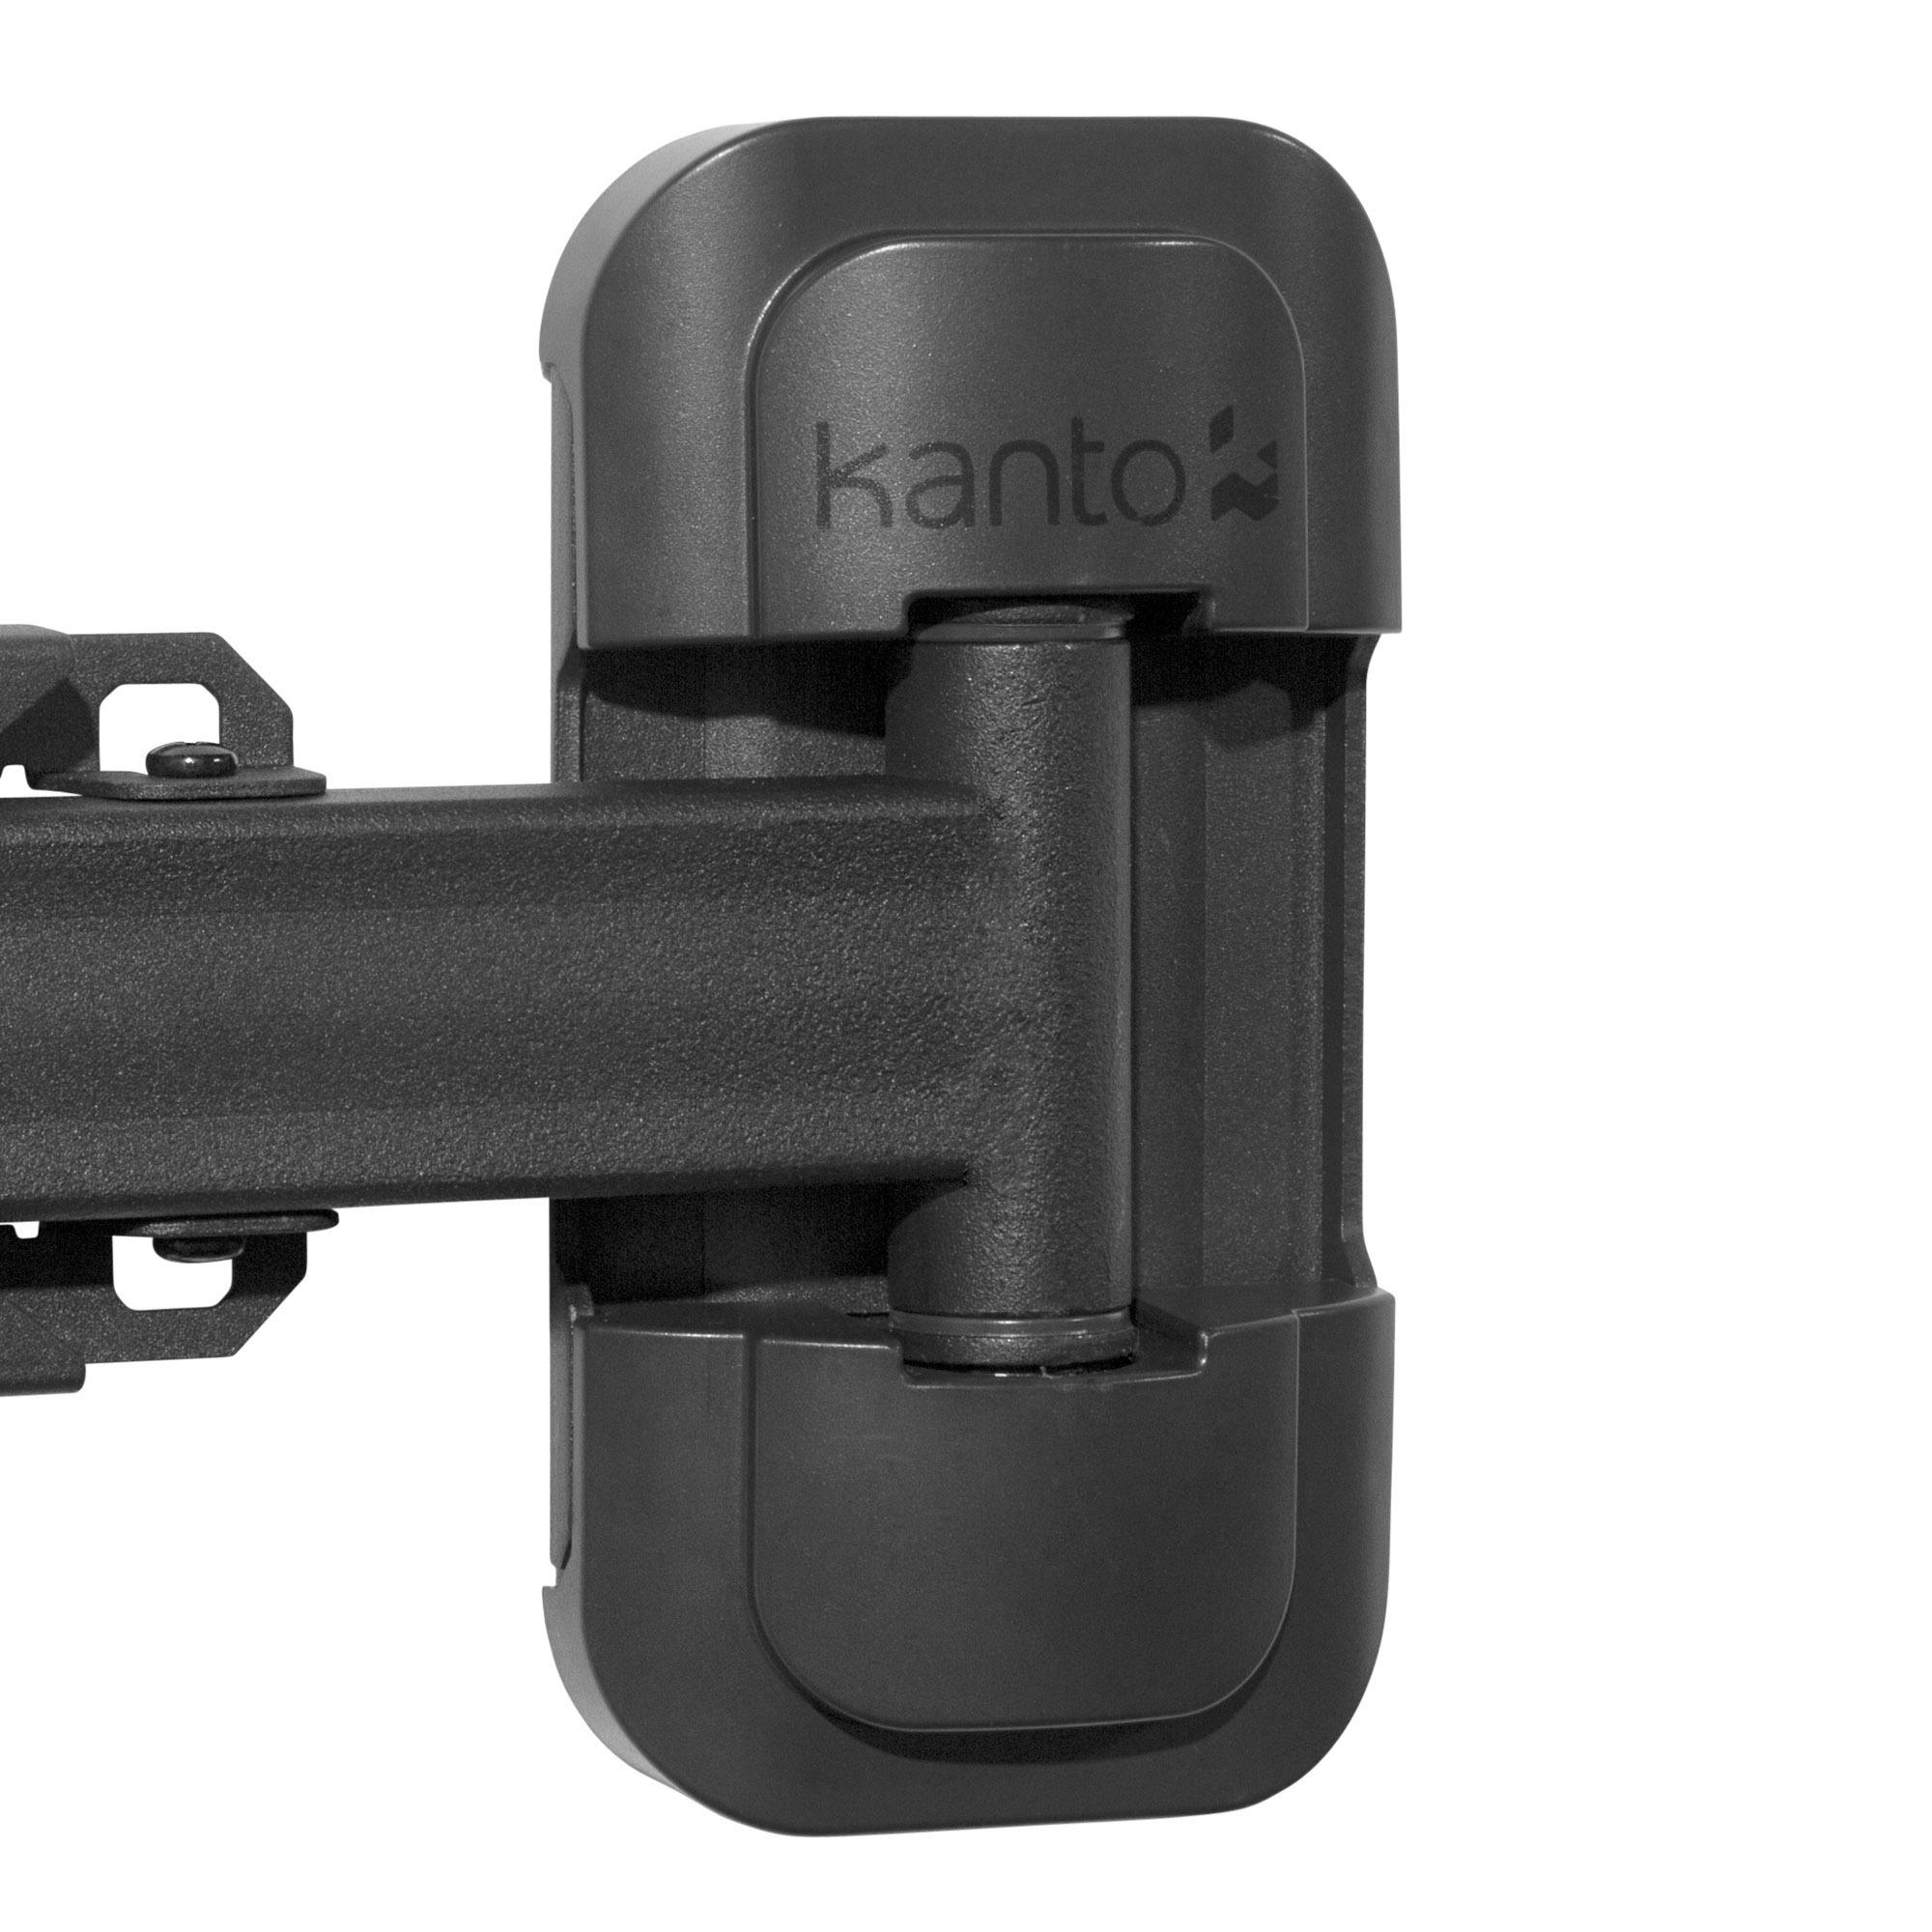 Kanto PS200 Full Motion Wall Mount for 26-60 inch Displays - Click Image to Close